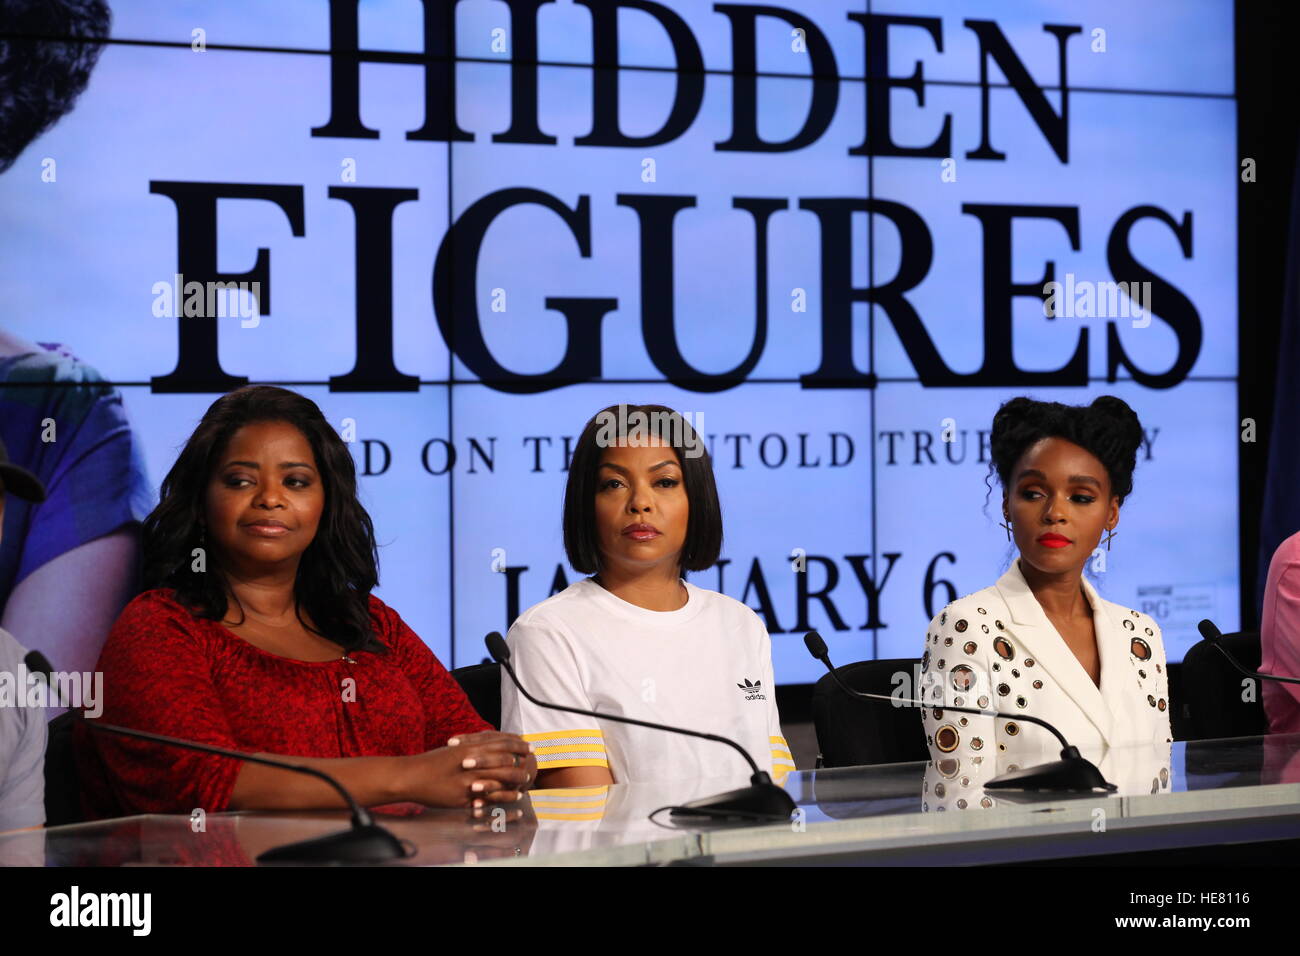 Hidden Figures actresses (L-R) Octavia Spencer, Taraji P. Henson, and Janelle Monae speak to the media during a news conference for the film at the Kennedy Space Center Press Site Auditorium December 12, 2016 in Merritt Island, Florida. The film is based on the African-American women who worked on the NASA Project Mercury missions in 1962. Stock Photo